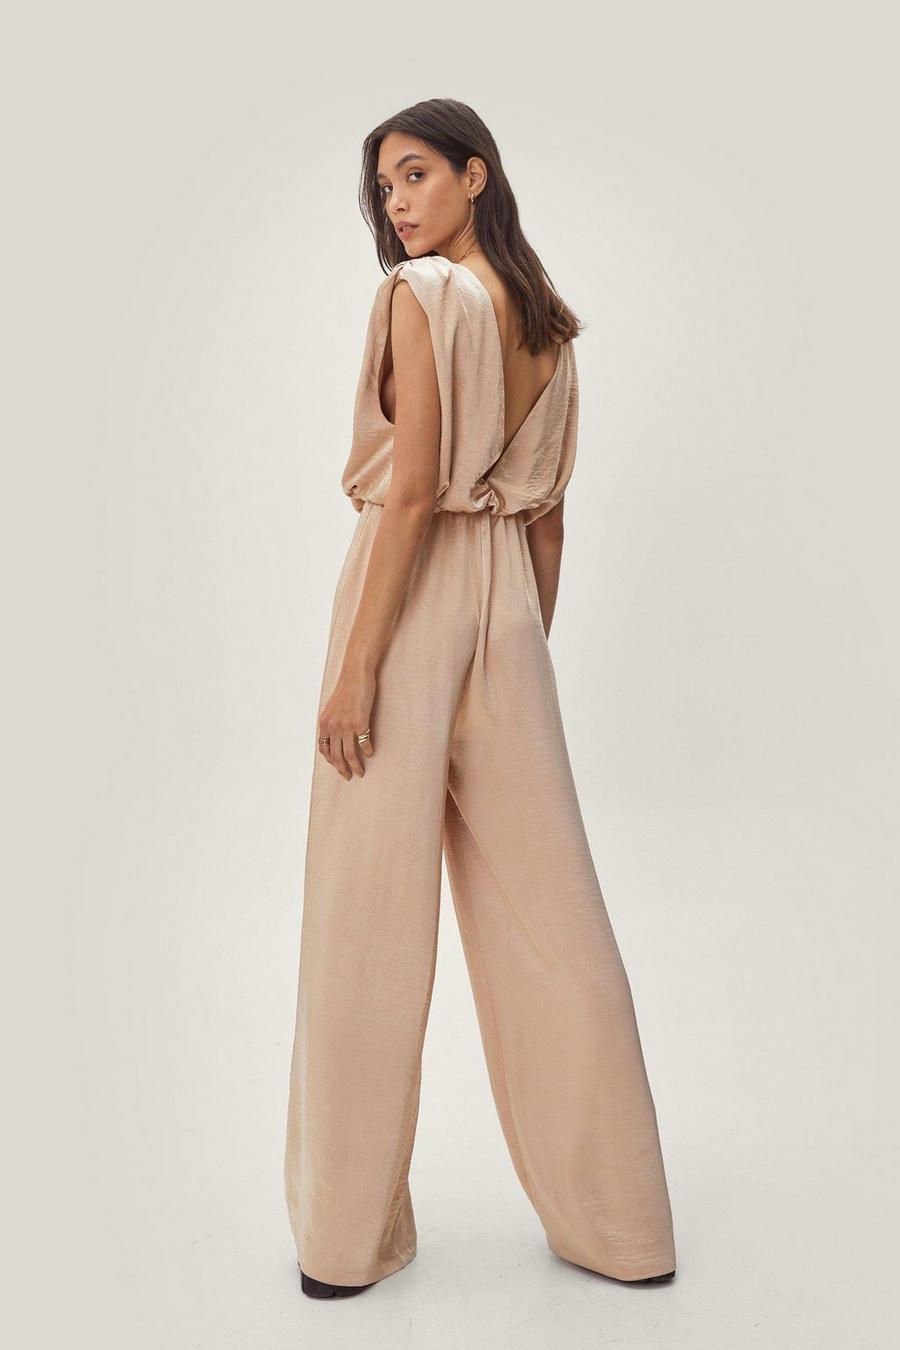 Champagne beige Recycled Shoulder Pad Satin Jumpsuit